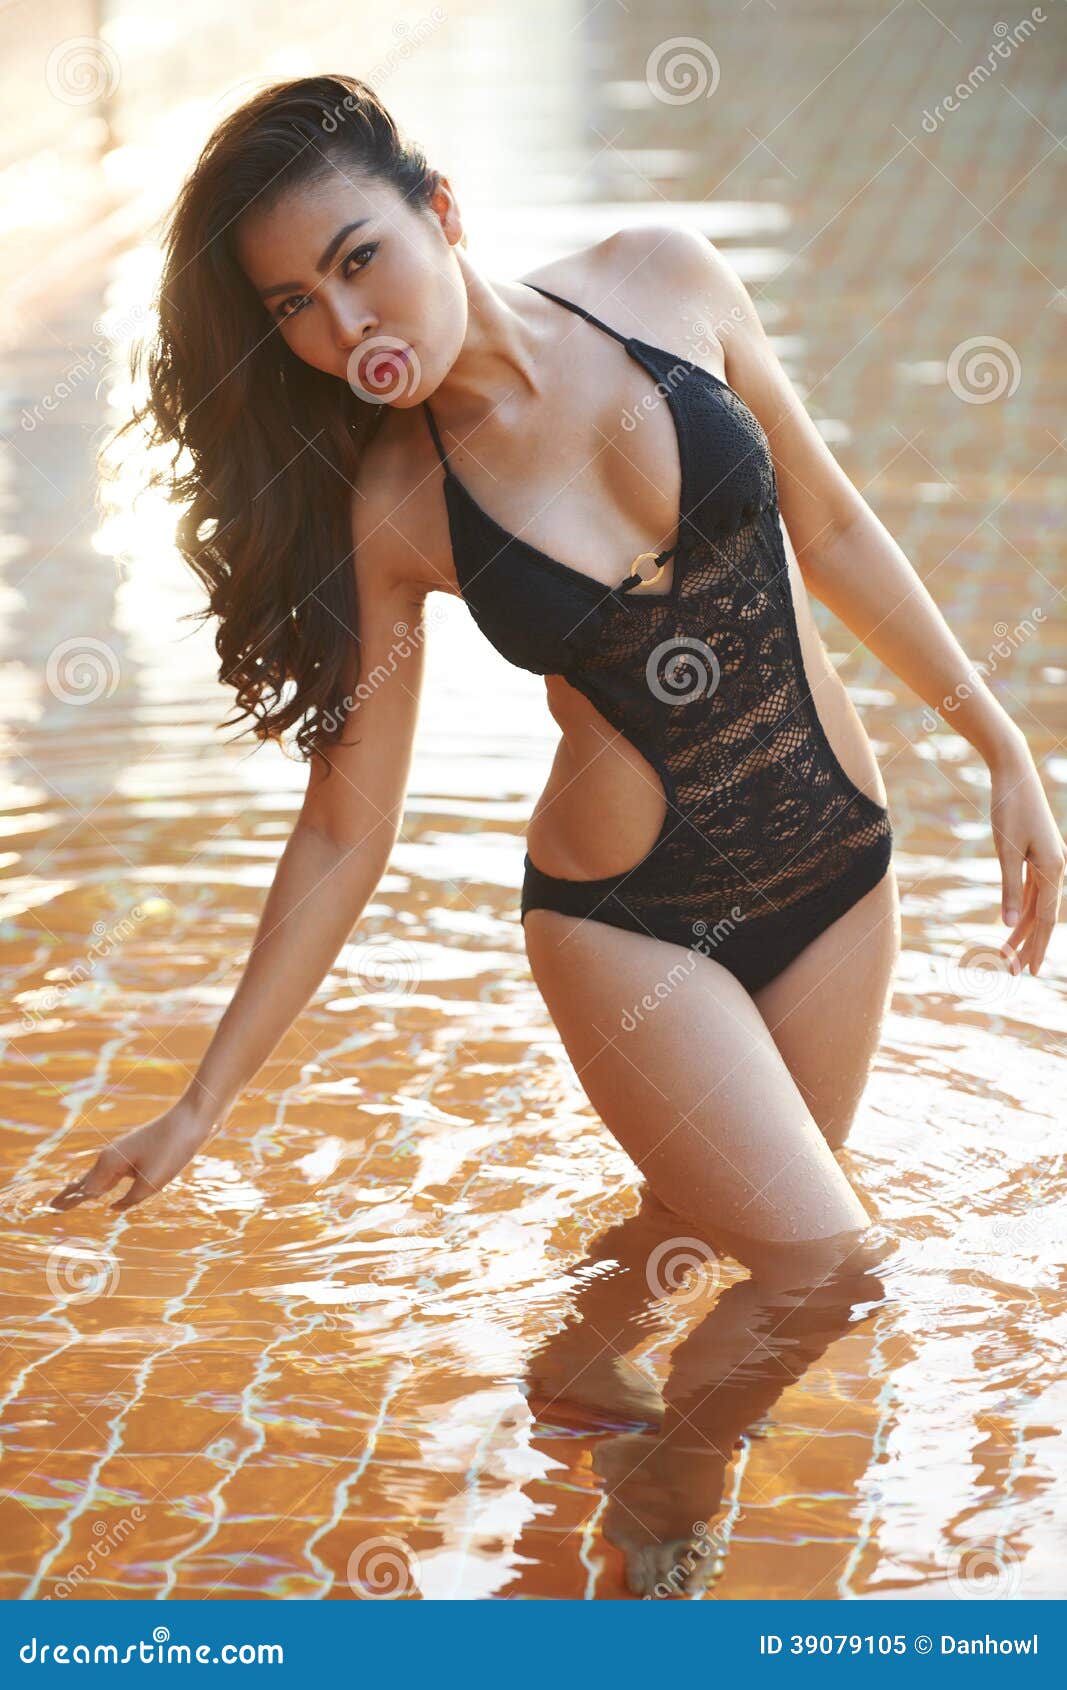 Asian Beauty in Pool stock image. Image of happiness - 39079105